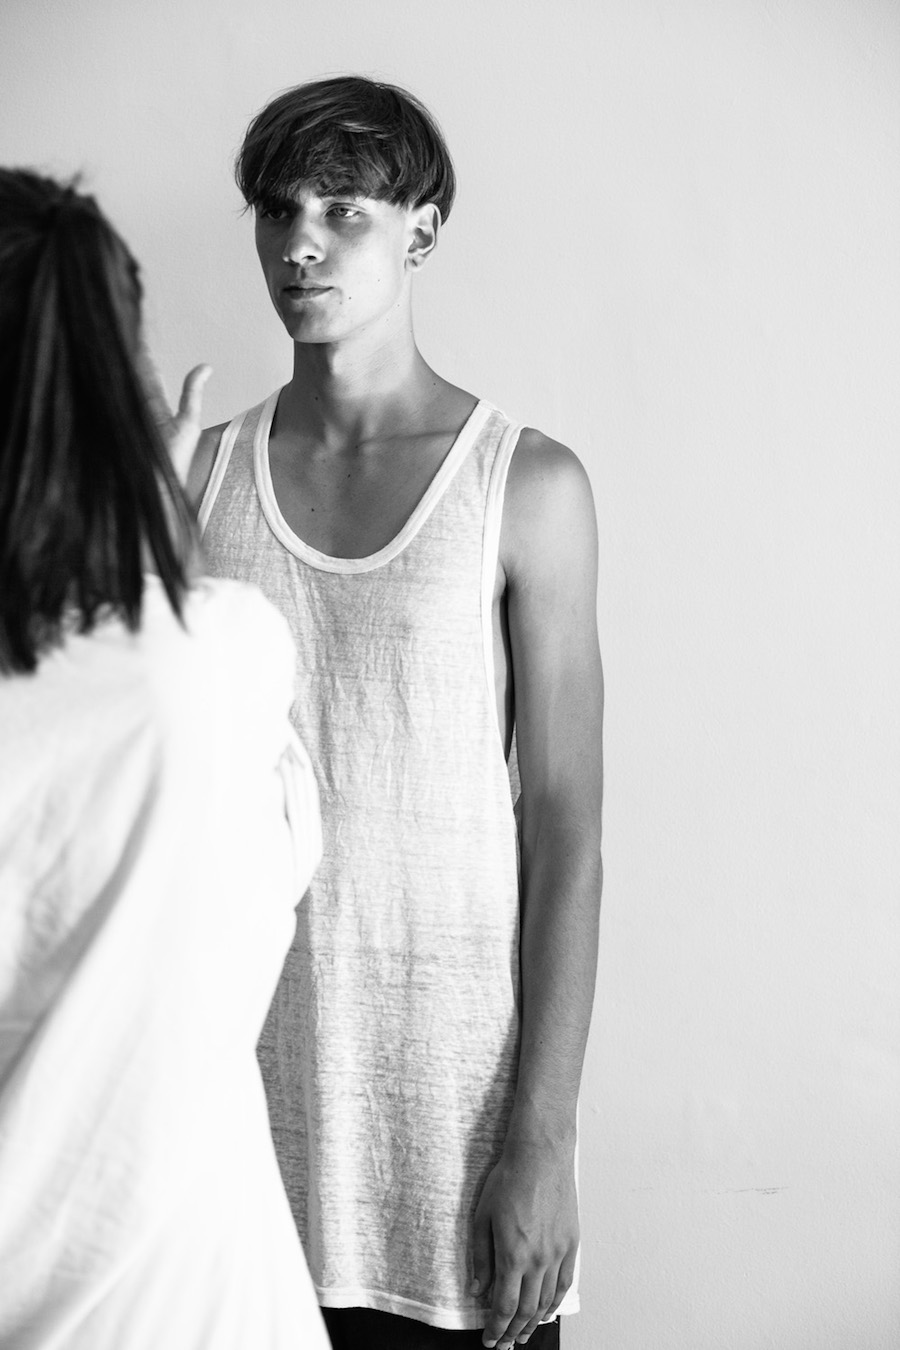 BTS at the VAMFF male model casting